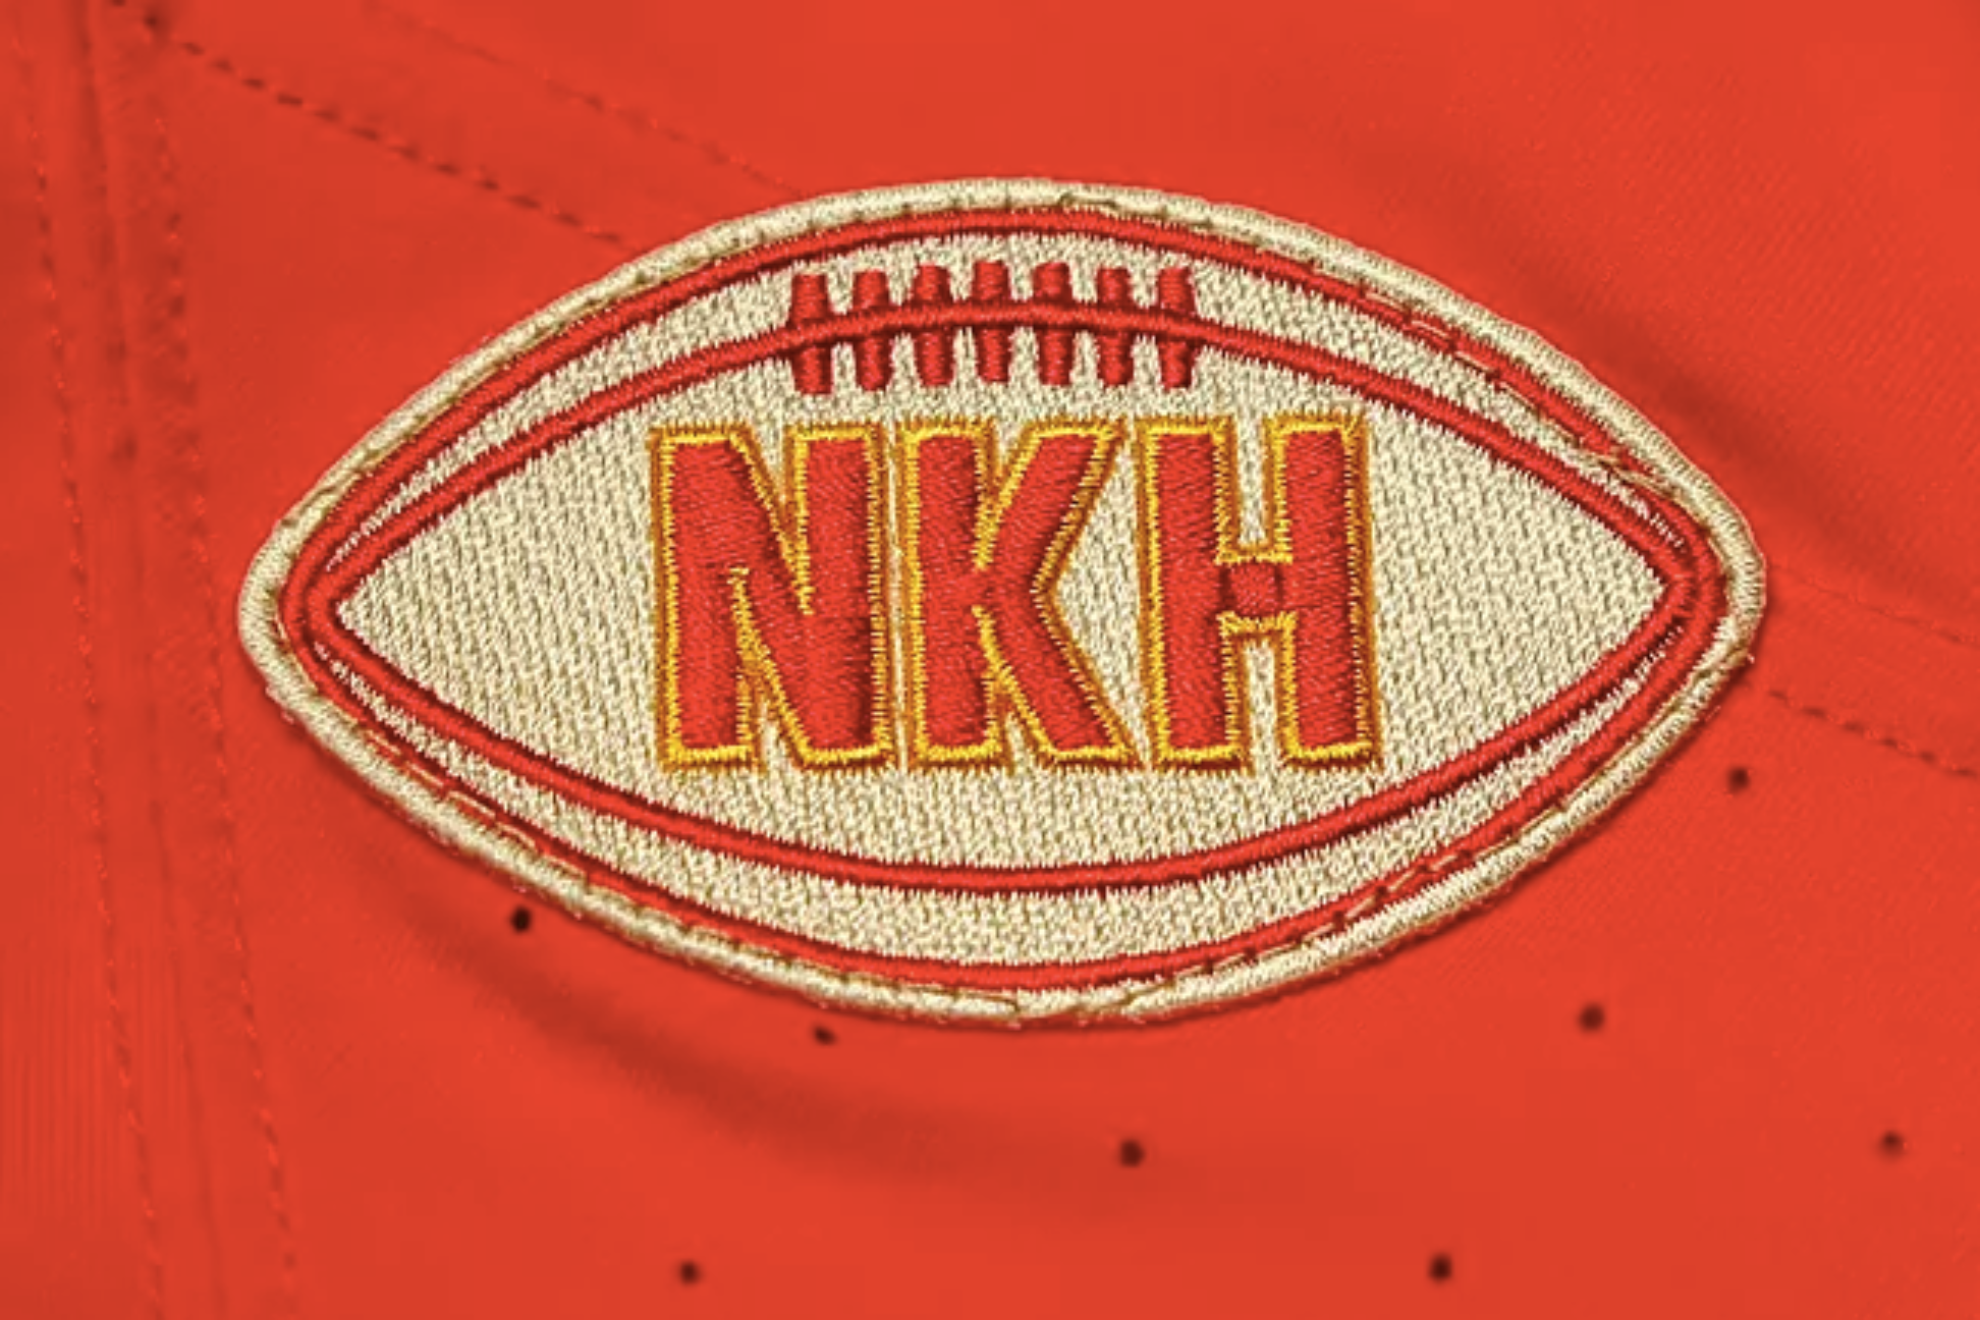 What the 'NKH' patch on the Kansas City Chiefs jersey stands for